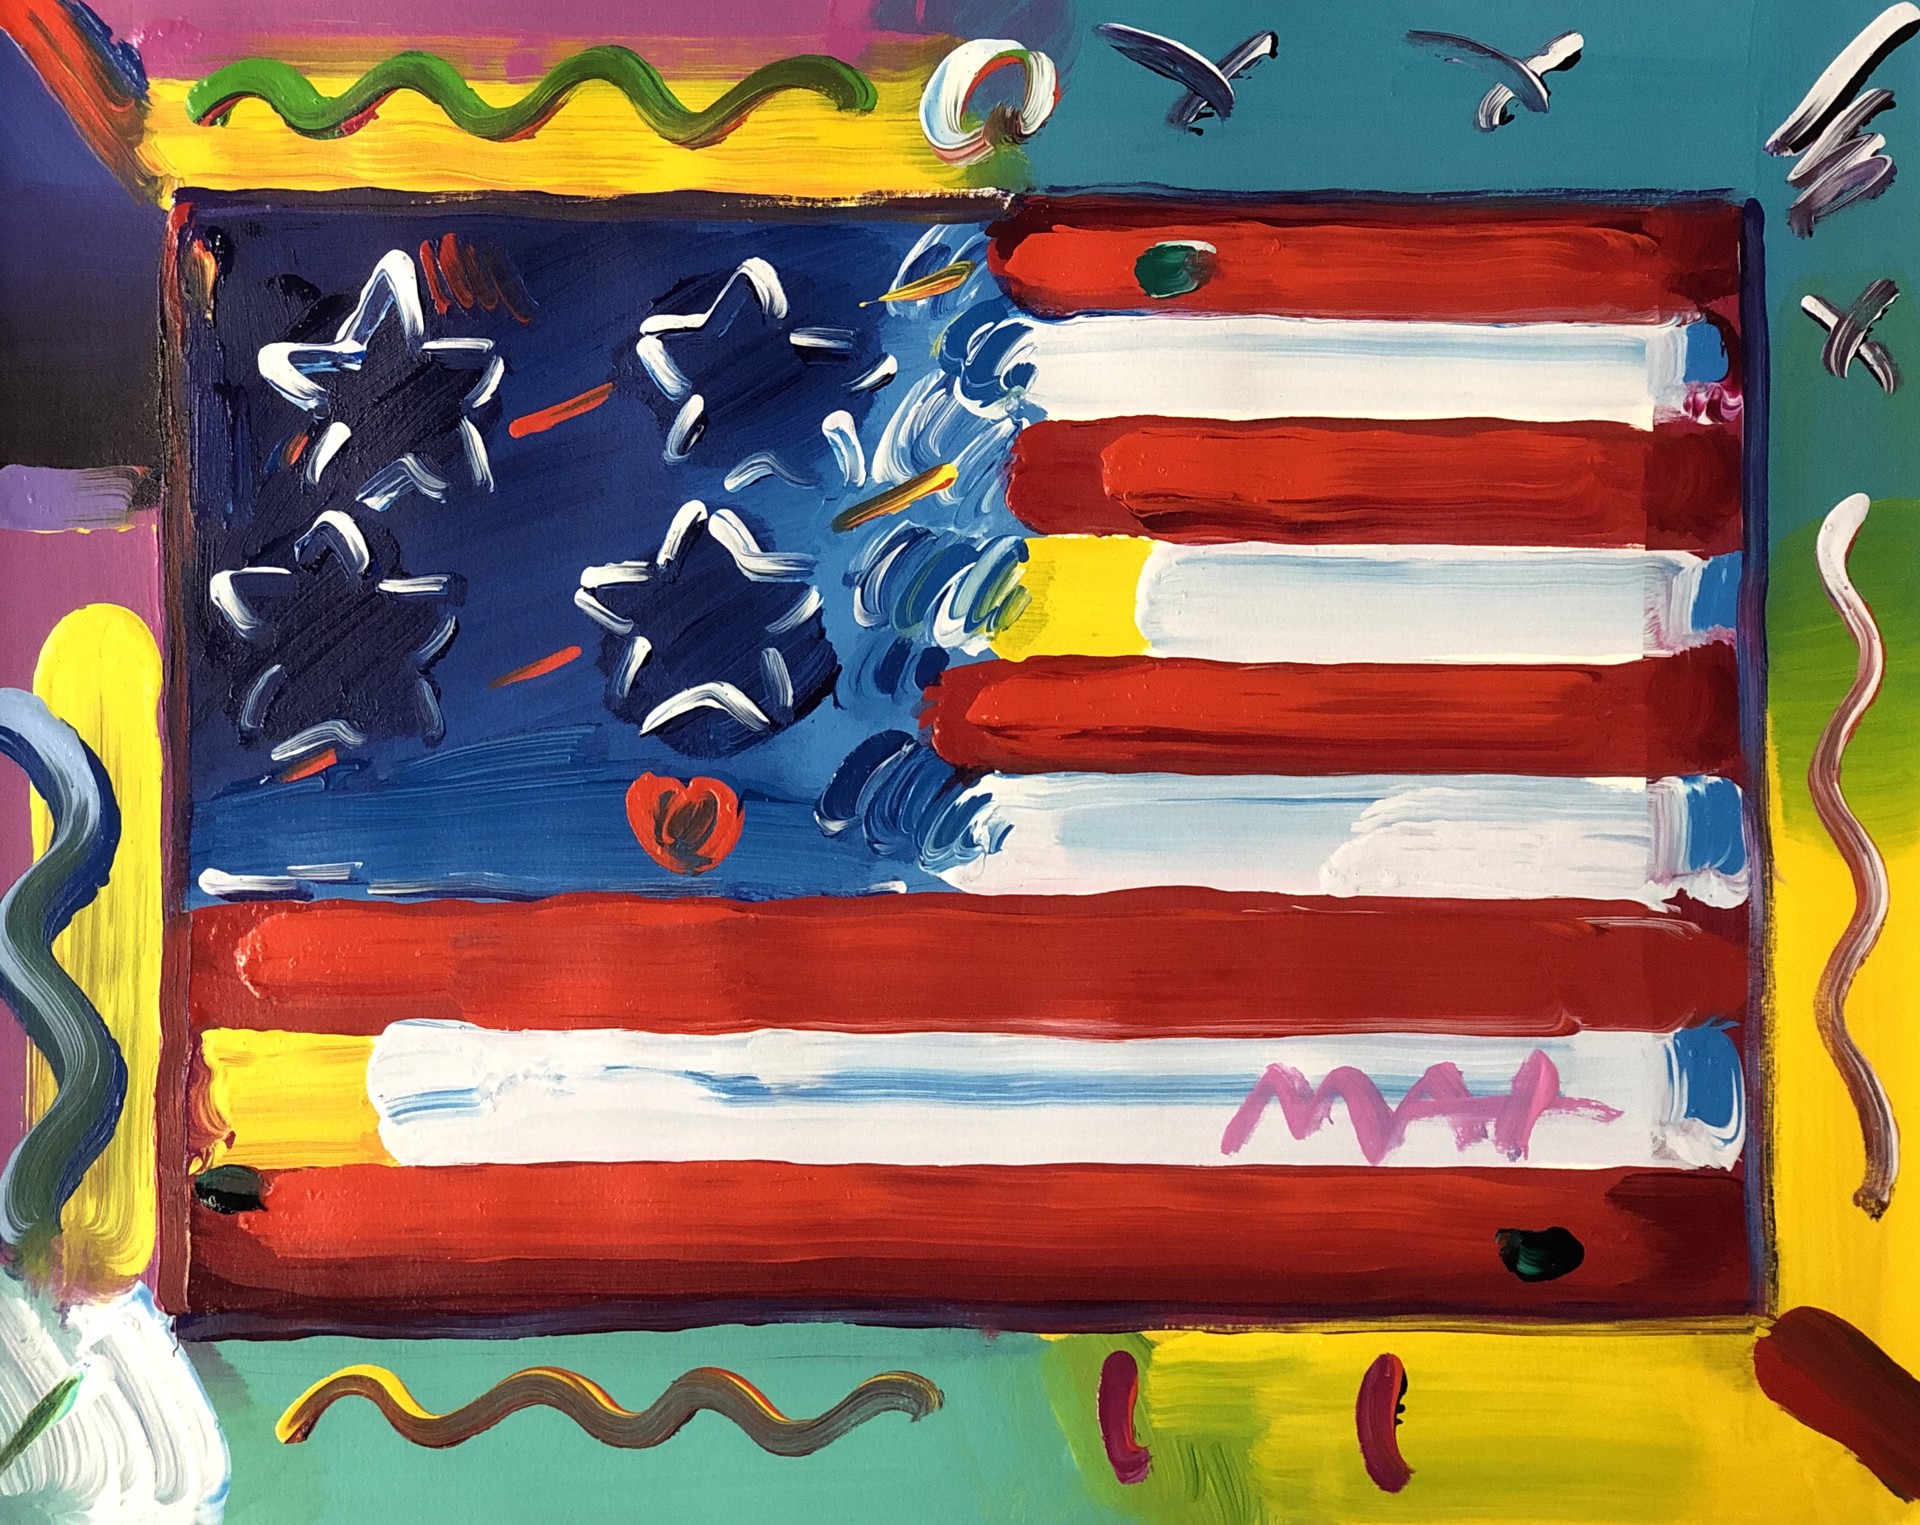 Flag with Heart by Peter Max